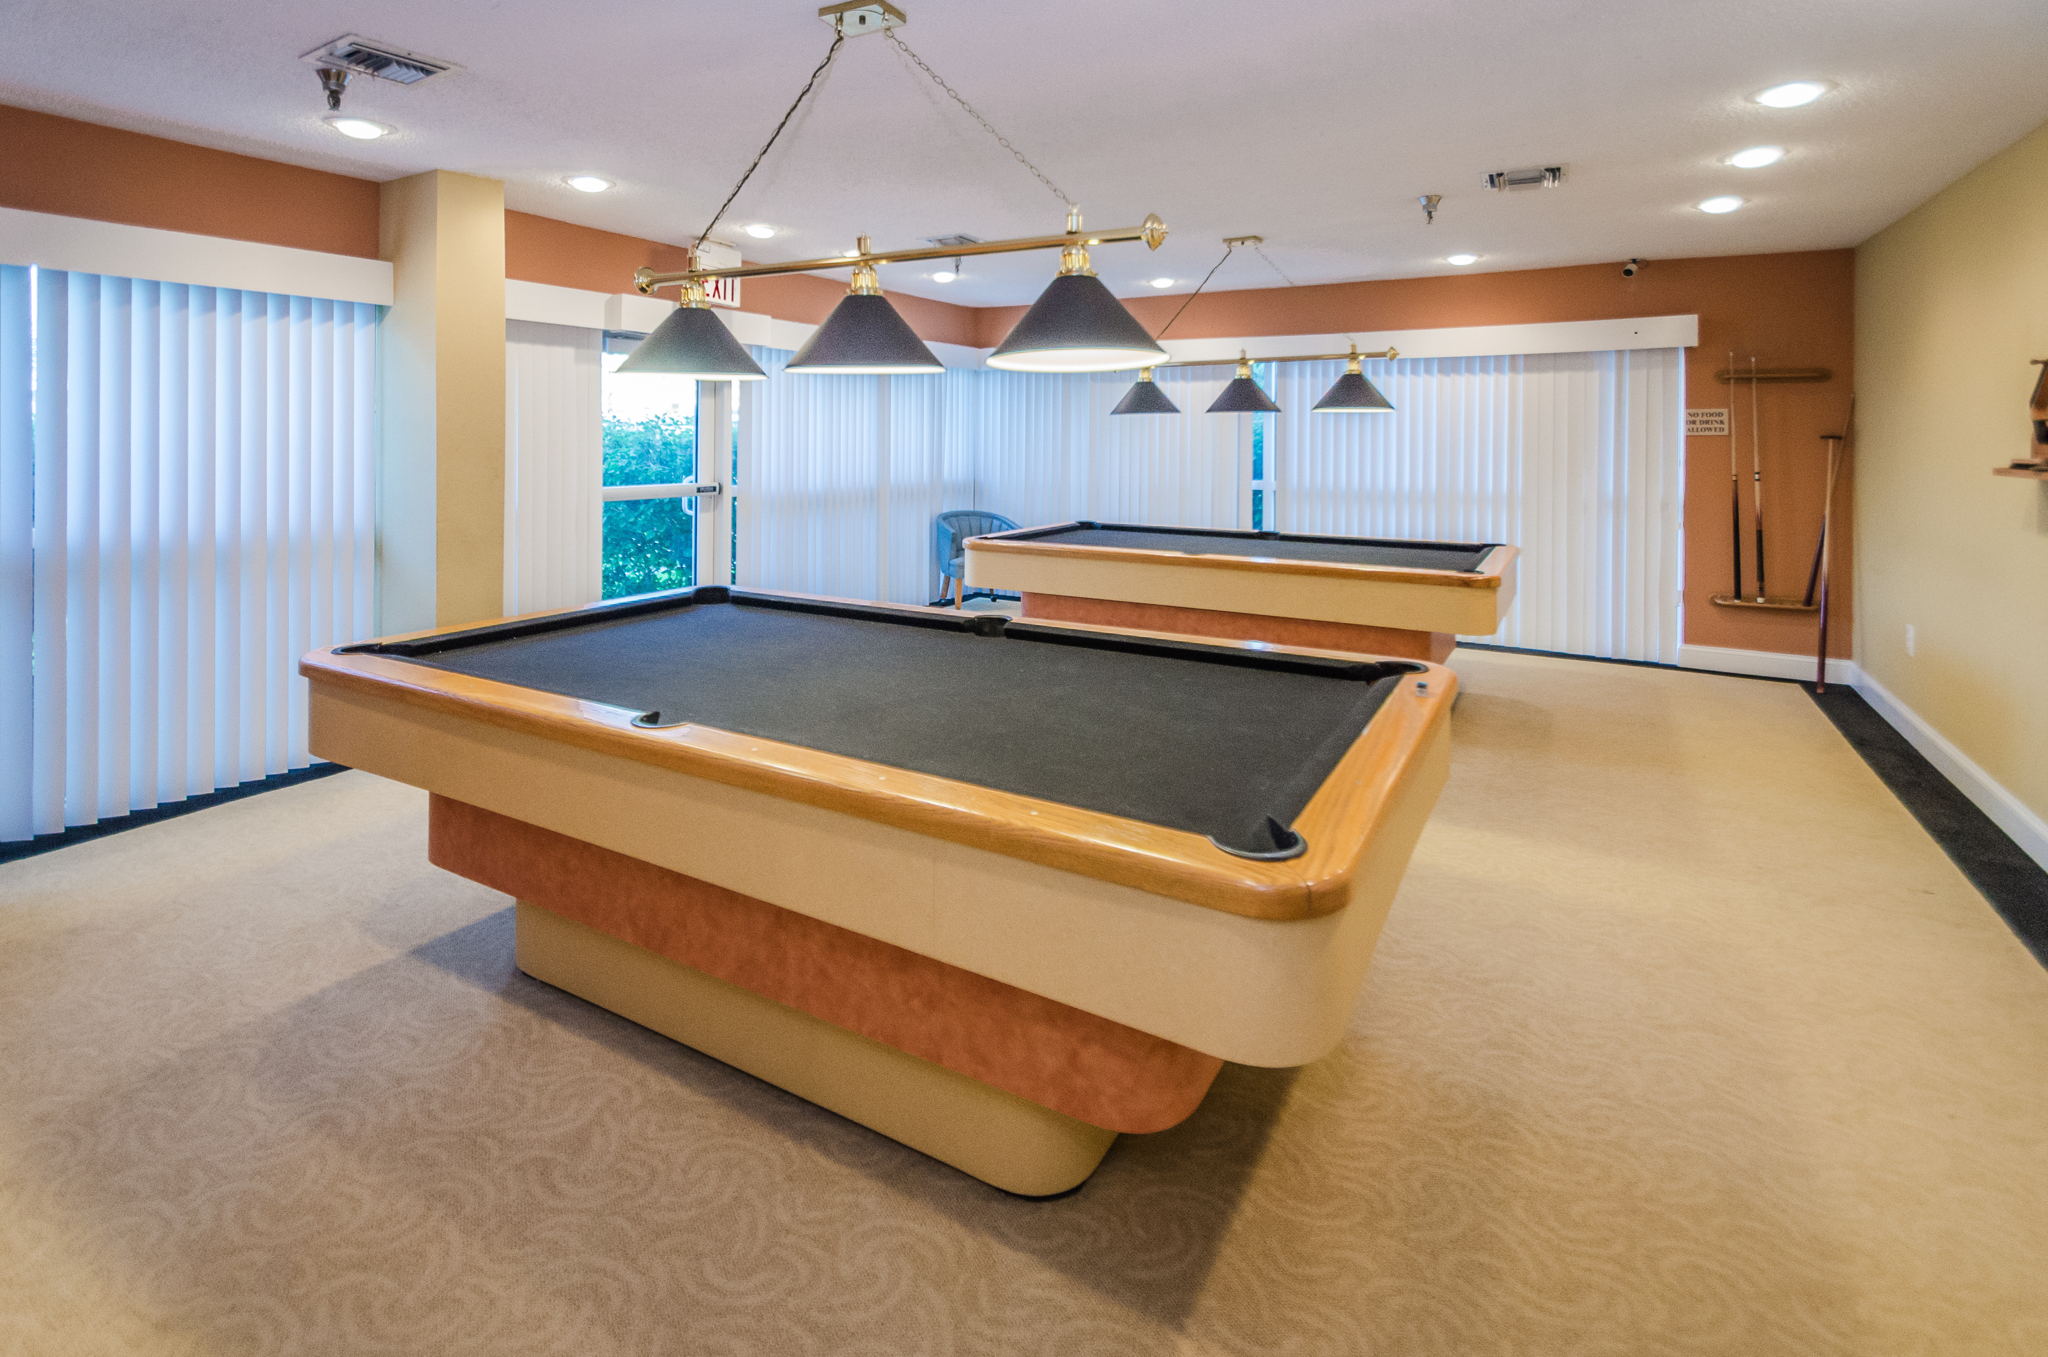 Clubhouse Pool Room